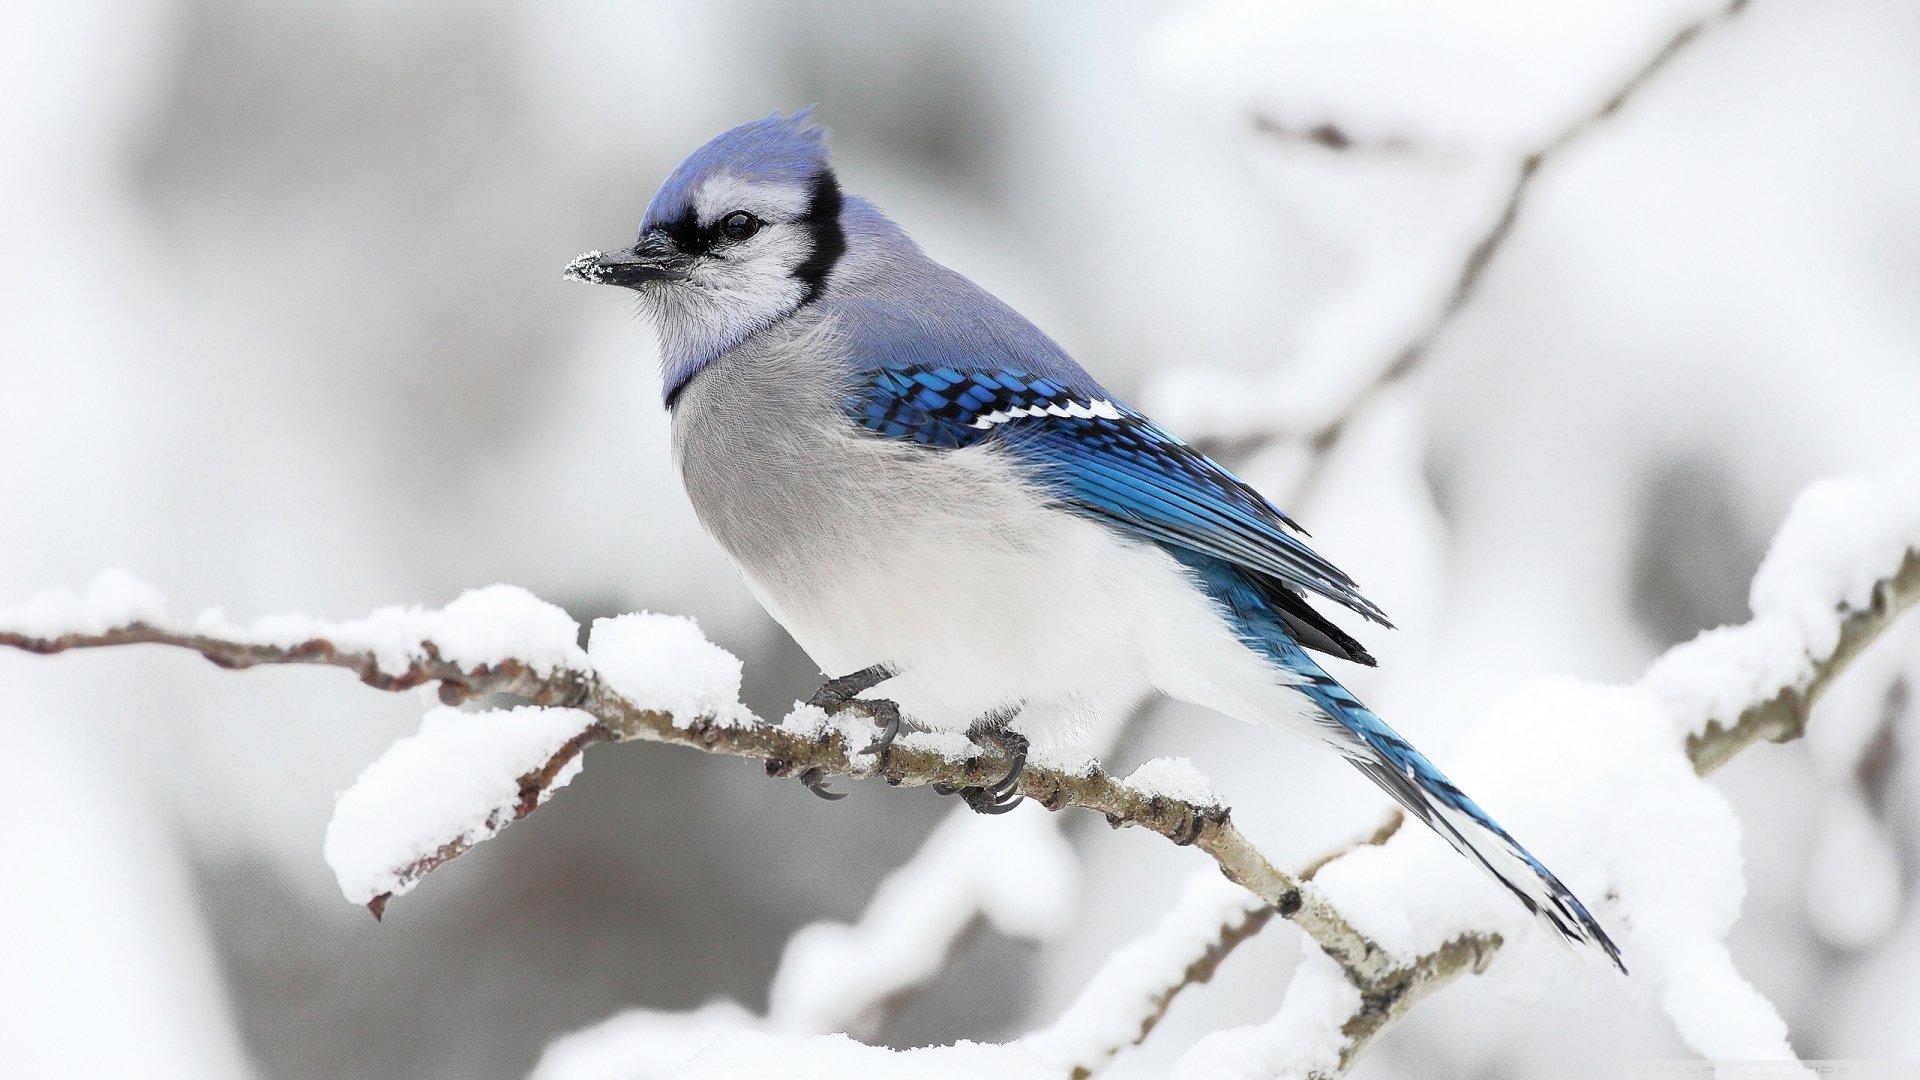 58 blue jay hd wallpapers background images wallpaper abyss 58 blue jay hd wallpapers background